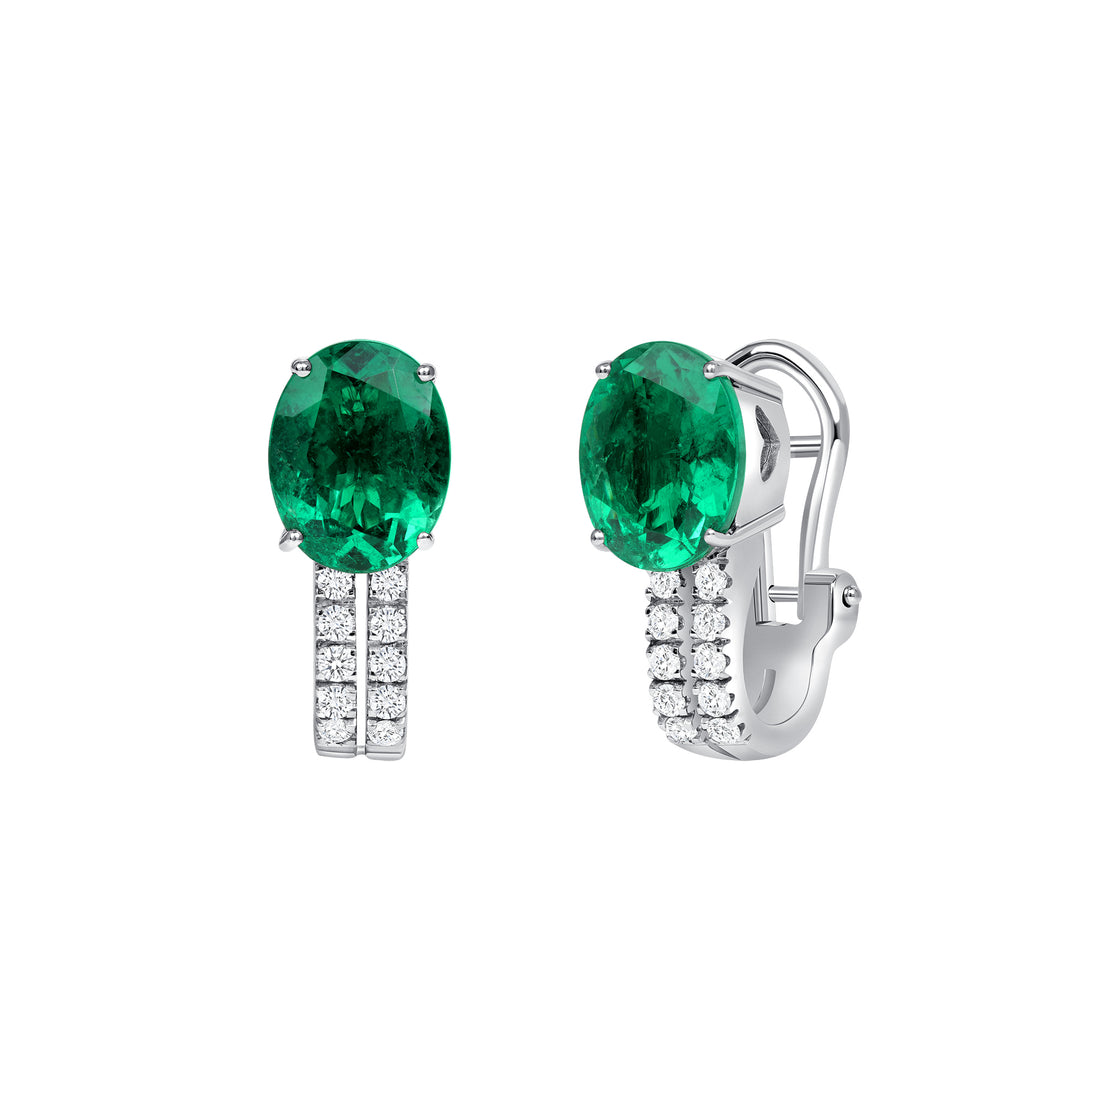 Round Brilliant Melee Diamond and Oval Emerald Huggie Earrings